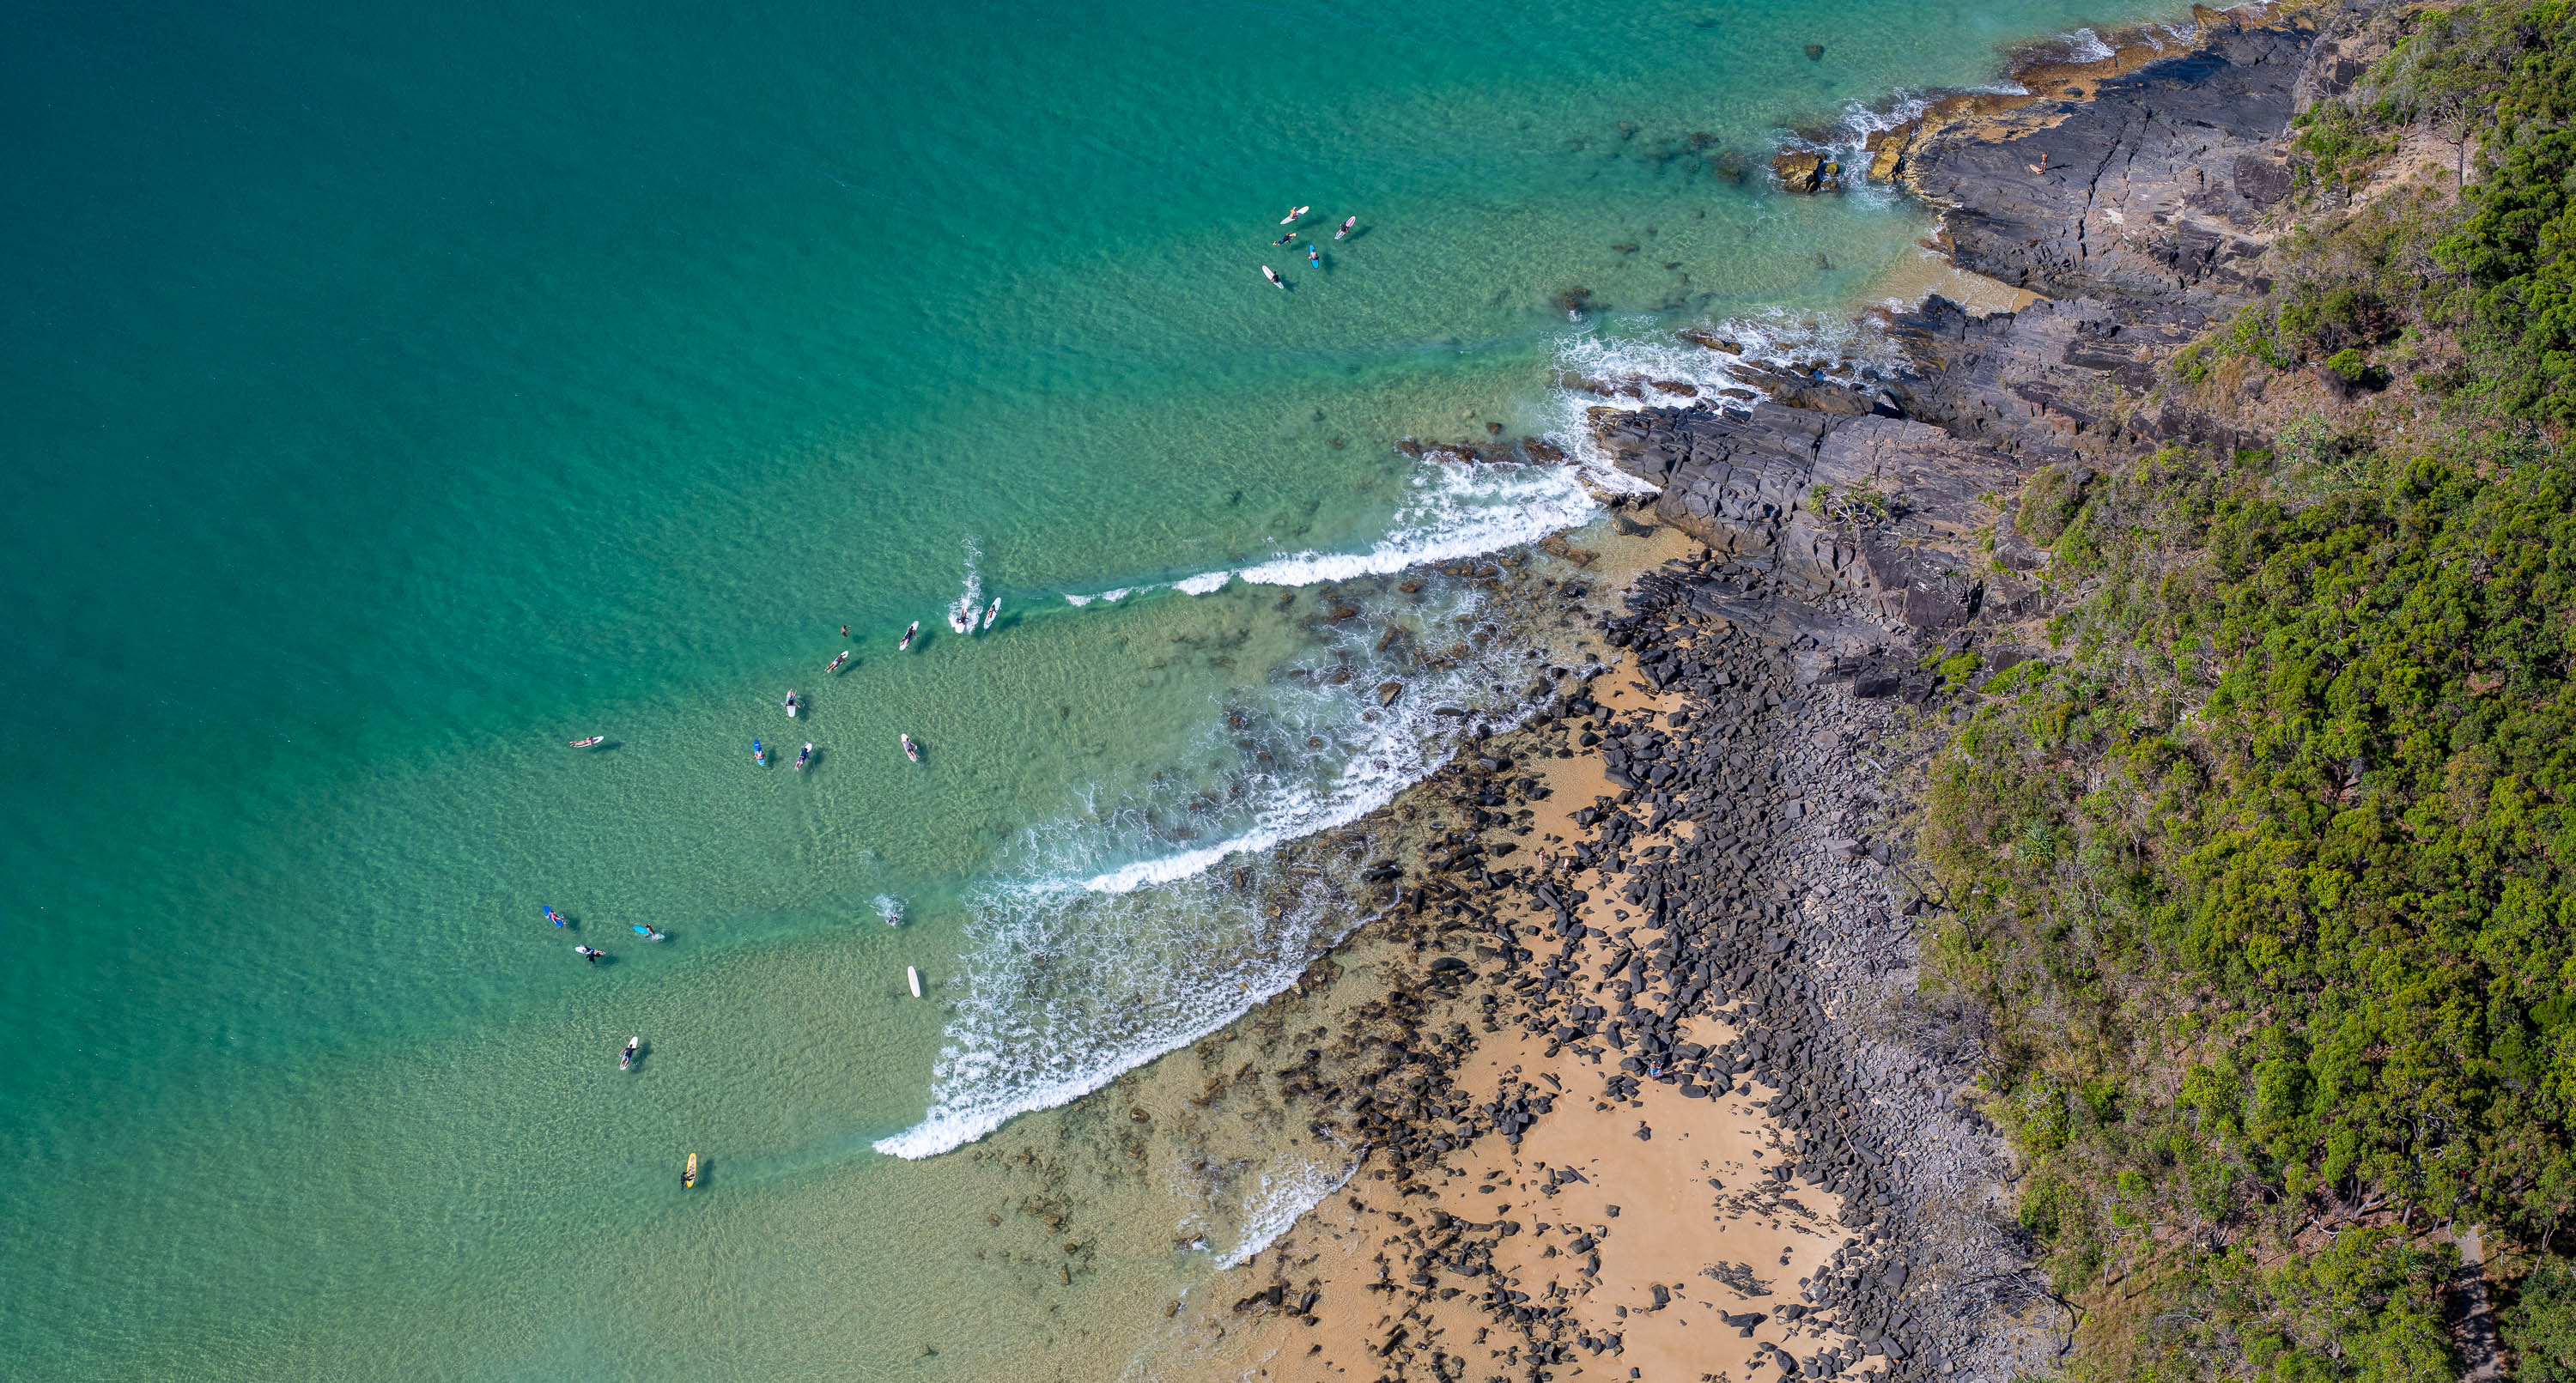 Aerial view of a giant green mountain wall with a beach below, Surf Break from above, Noosa National Park, Queensland